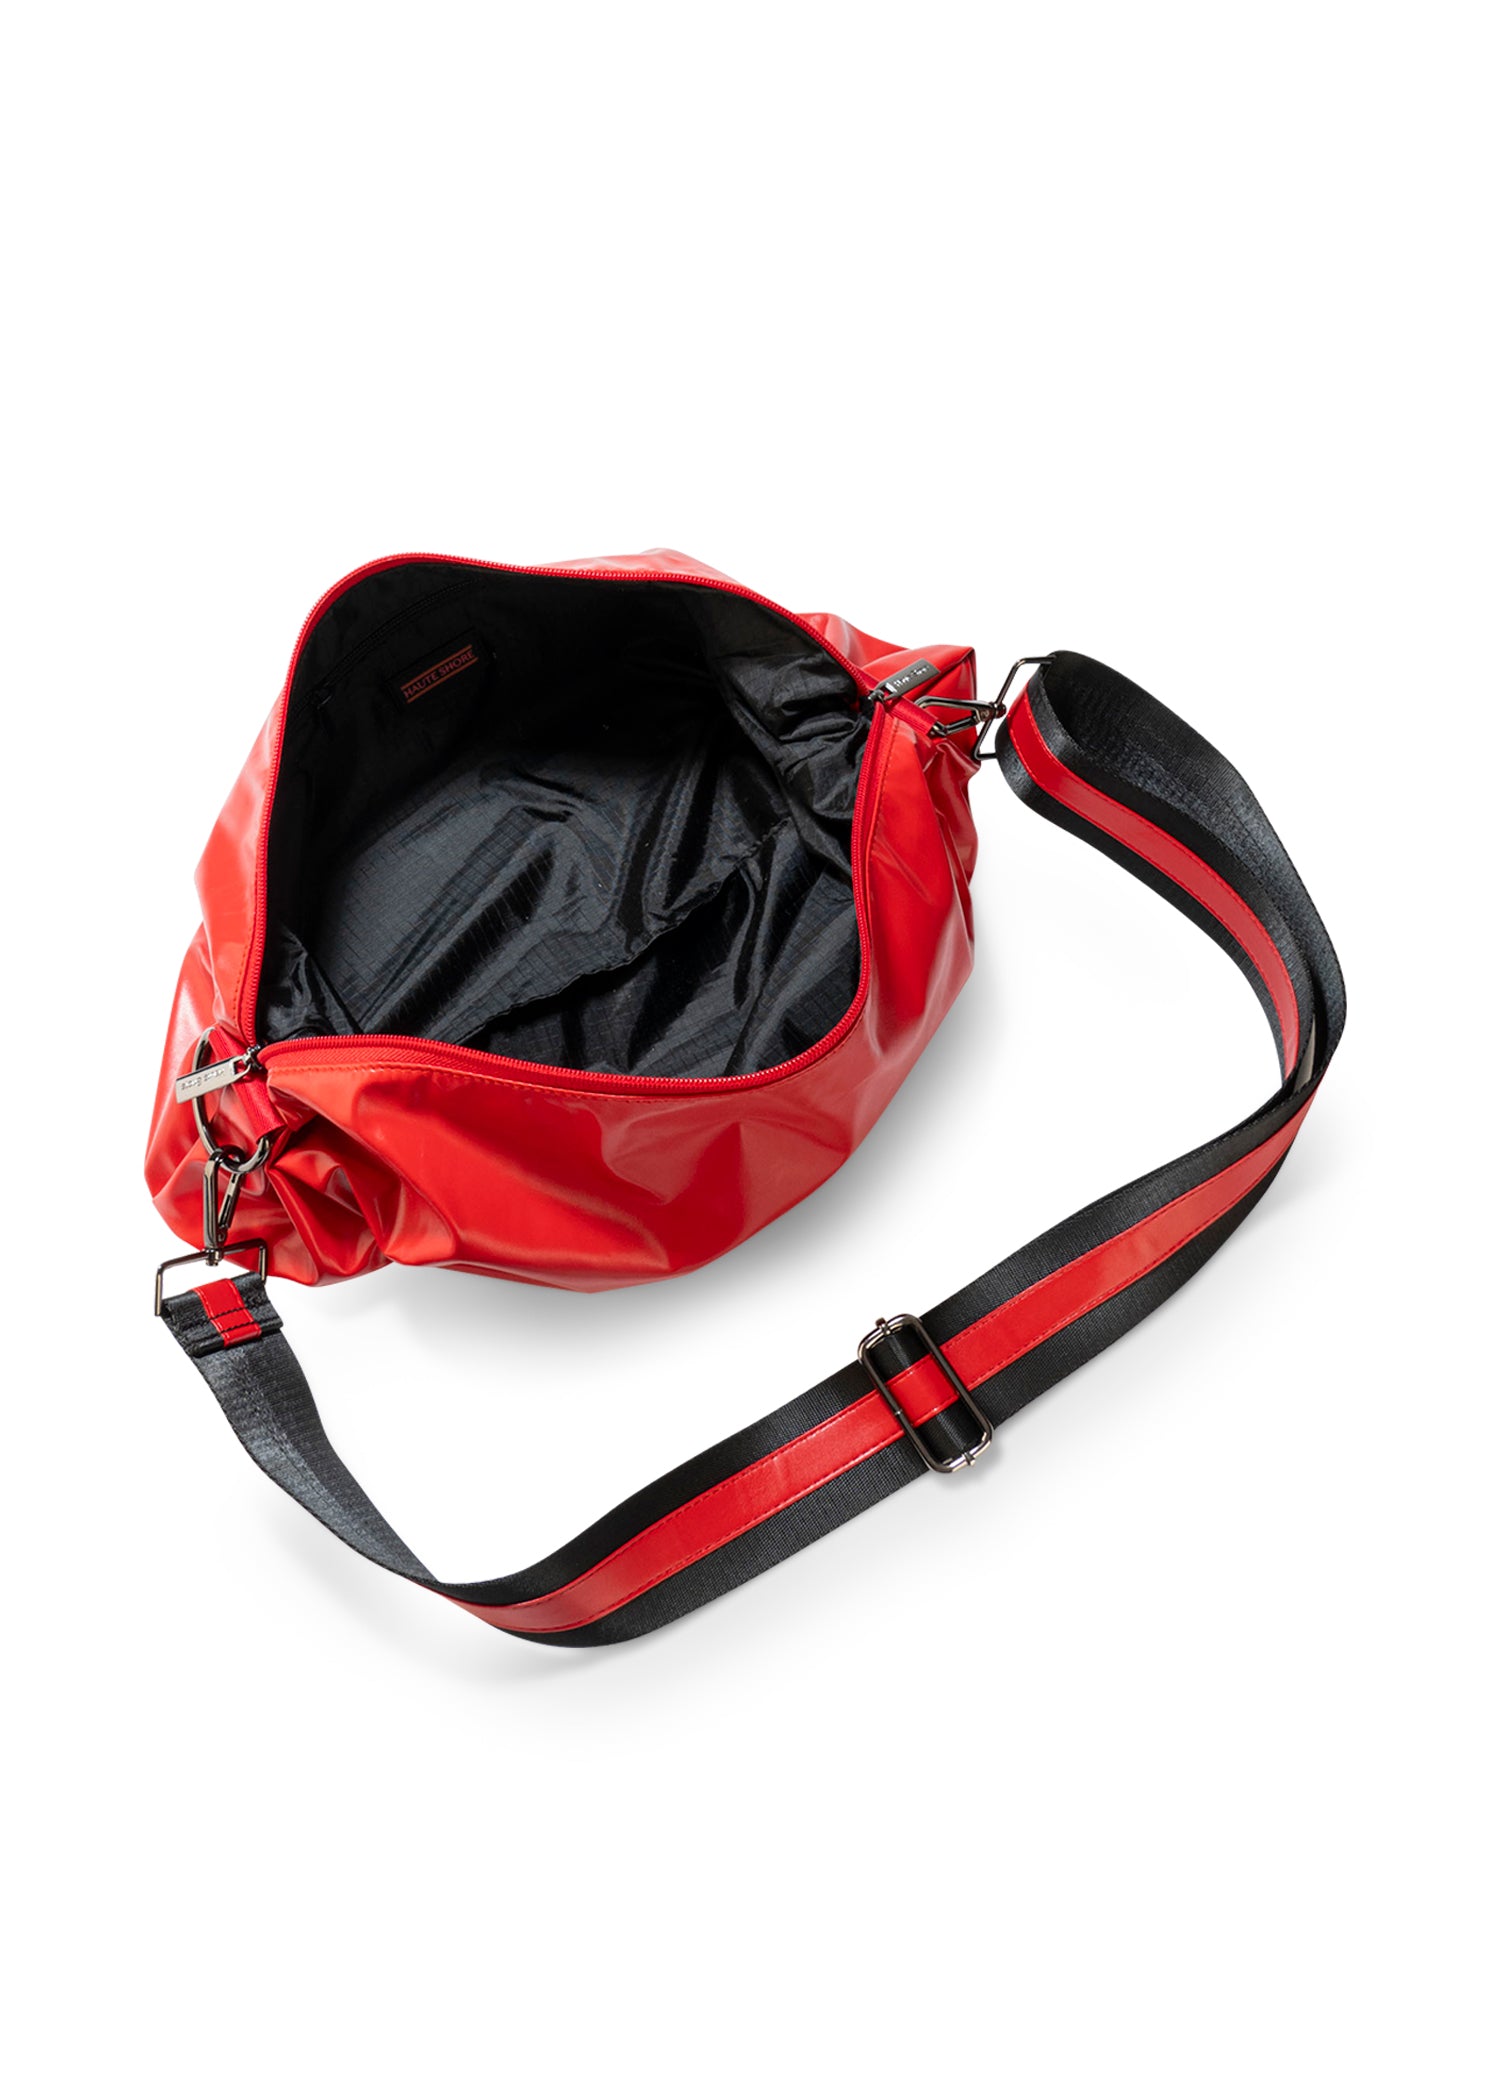 The Ollie Chili Sling Bag